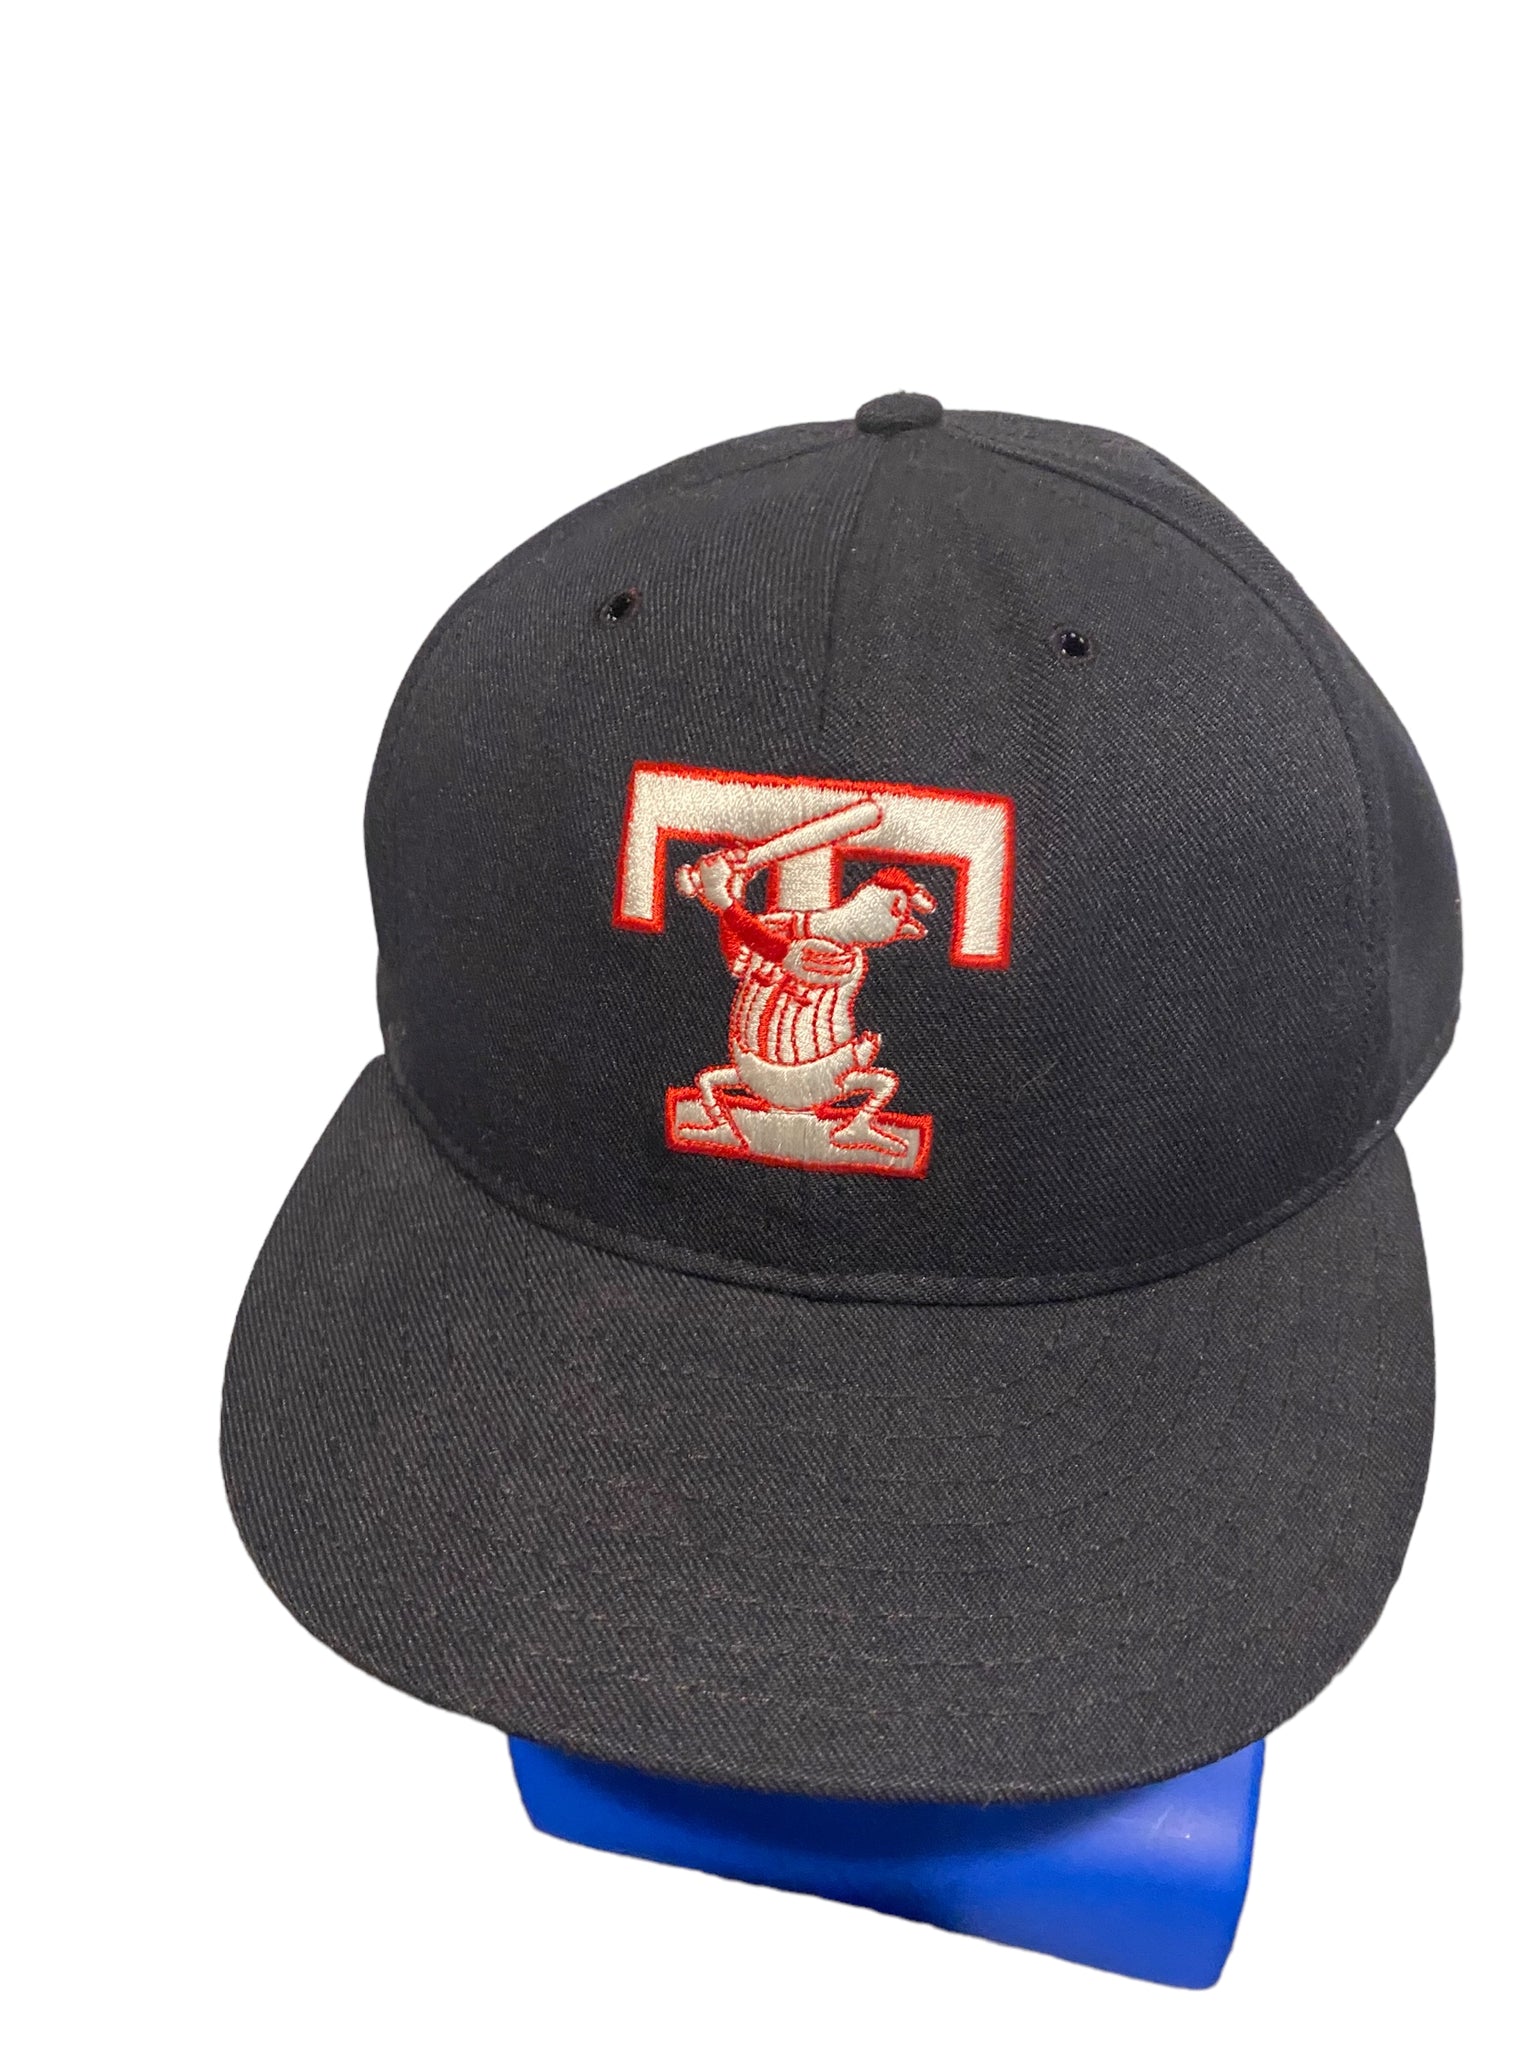 vintage pro line cap minor league embroidered toldeo mud hens logo hat size 8